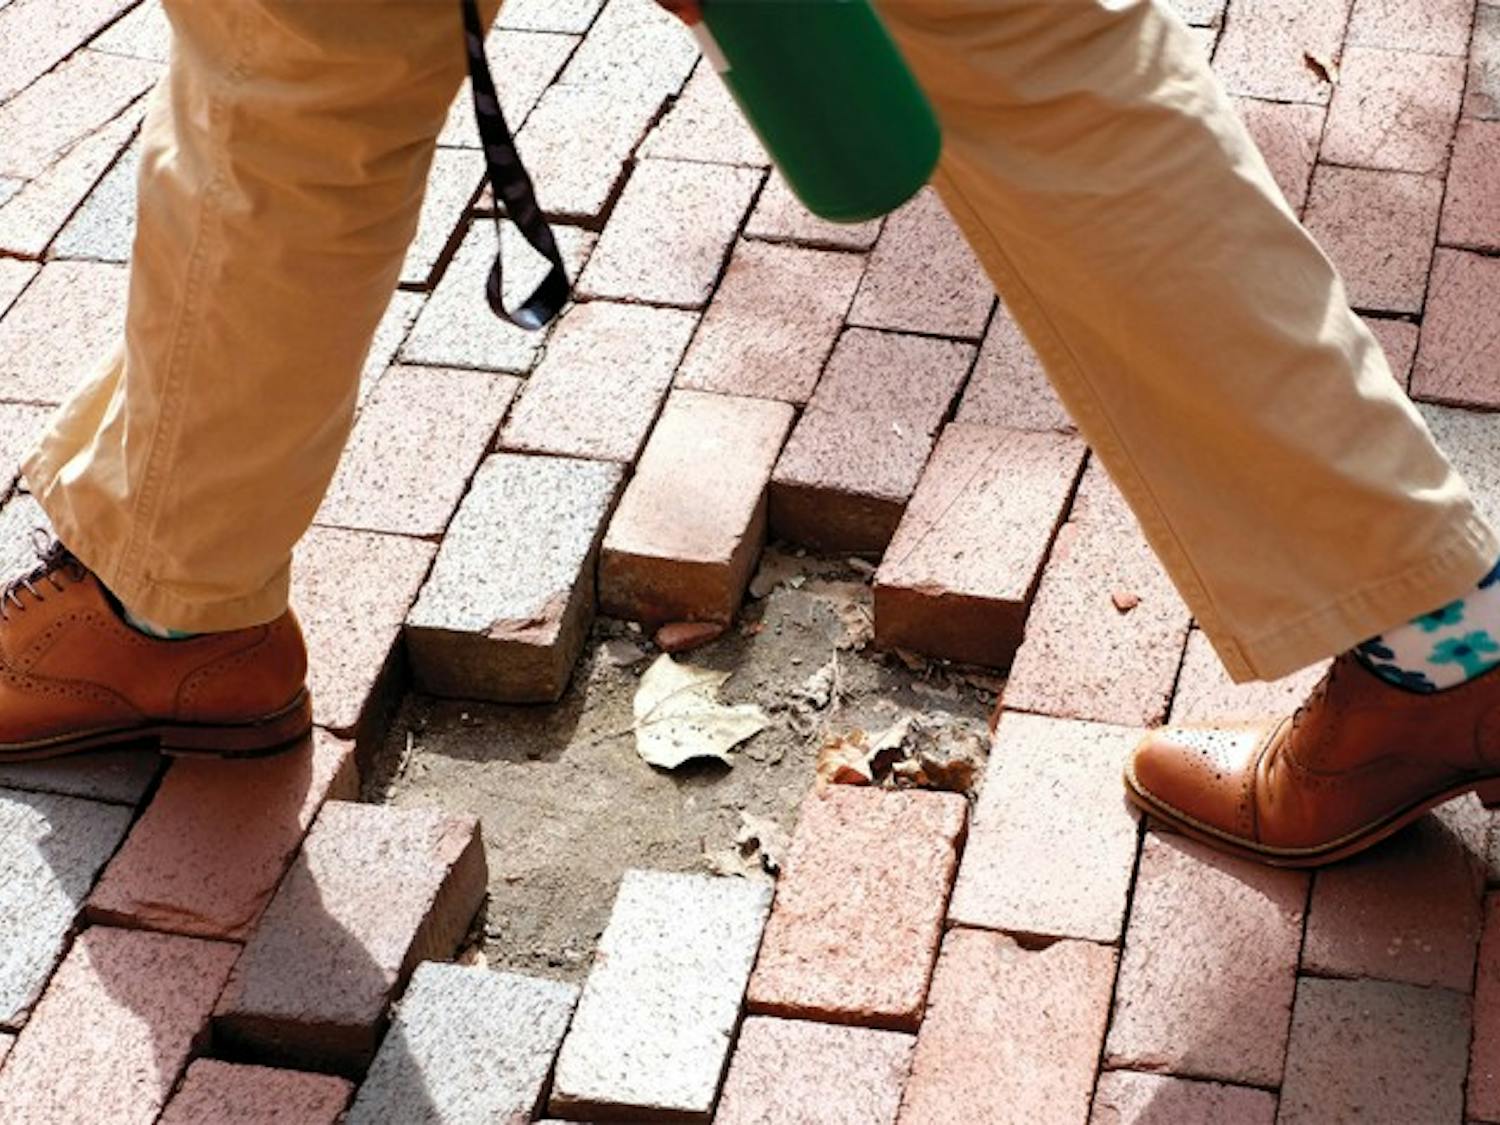 D’Angelo Gatewood, a chemistry and public relations double major, crosses a patch of missing bricks on his way to an Admissions Ambassadors interview.